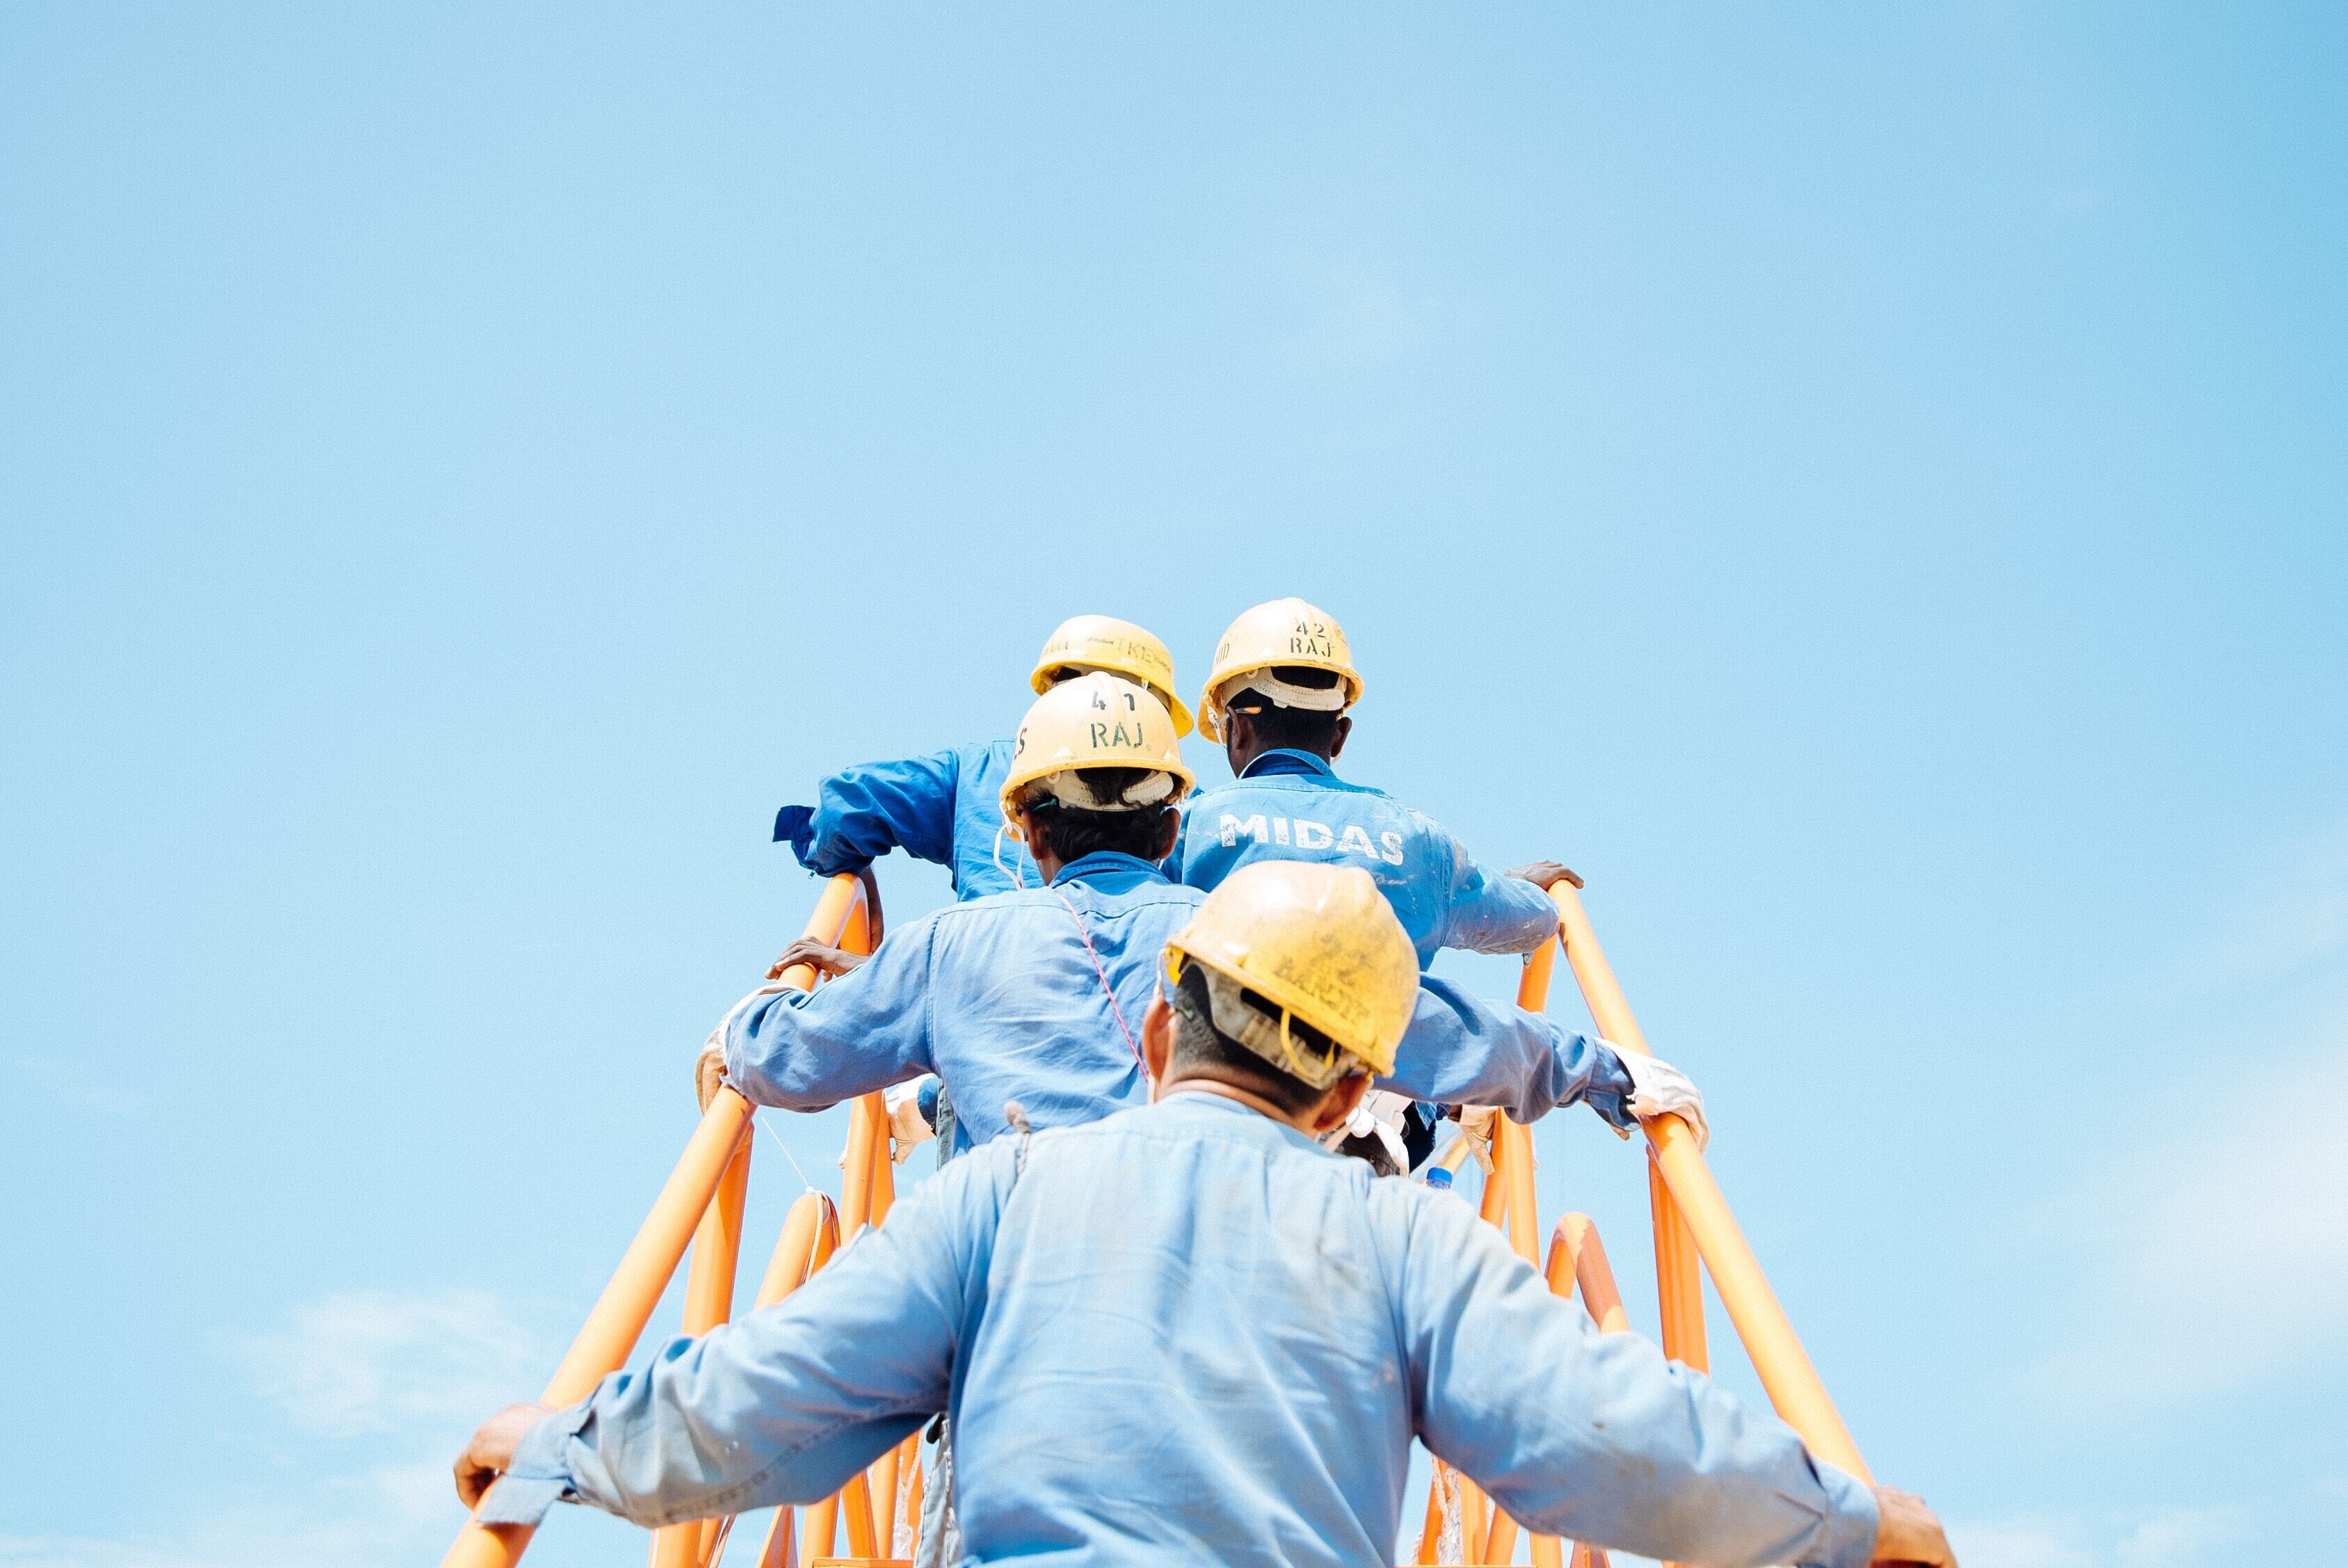 Construction workers heading up a yellow constructions staircase: Companies with private equity ownership employ 12 million people in the United States.